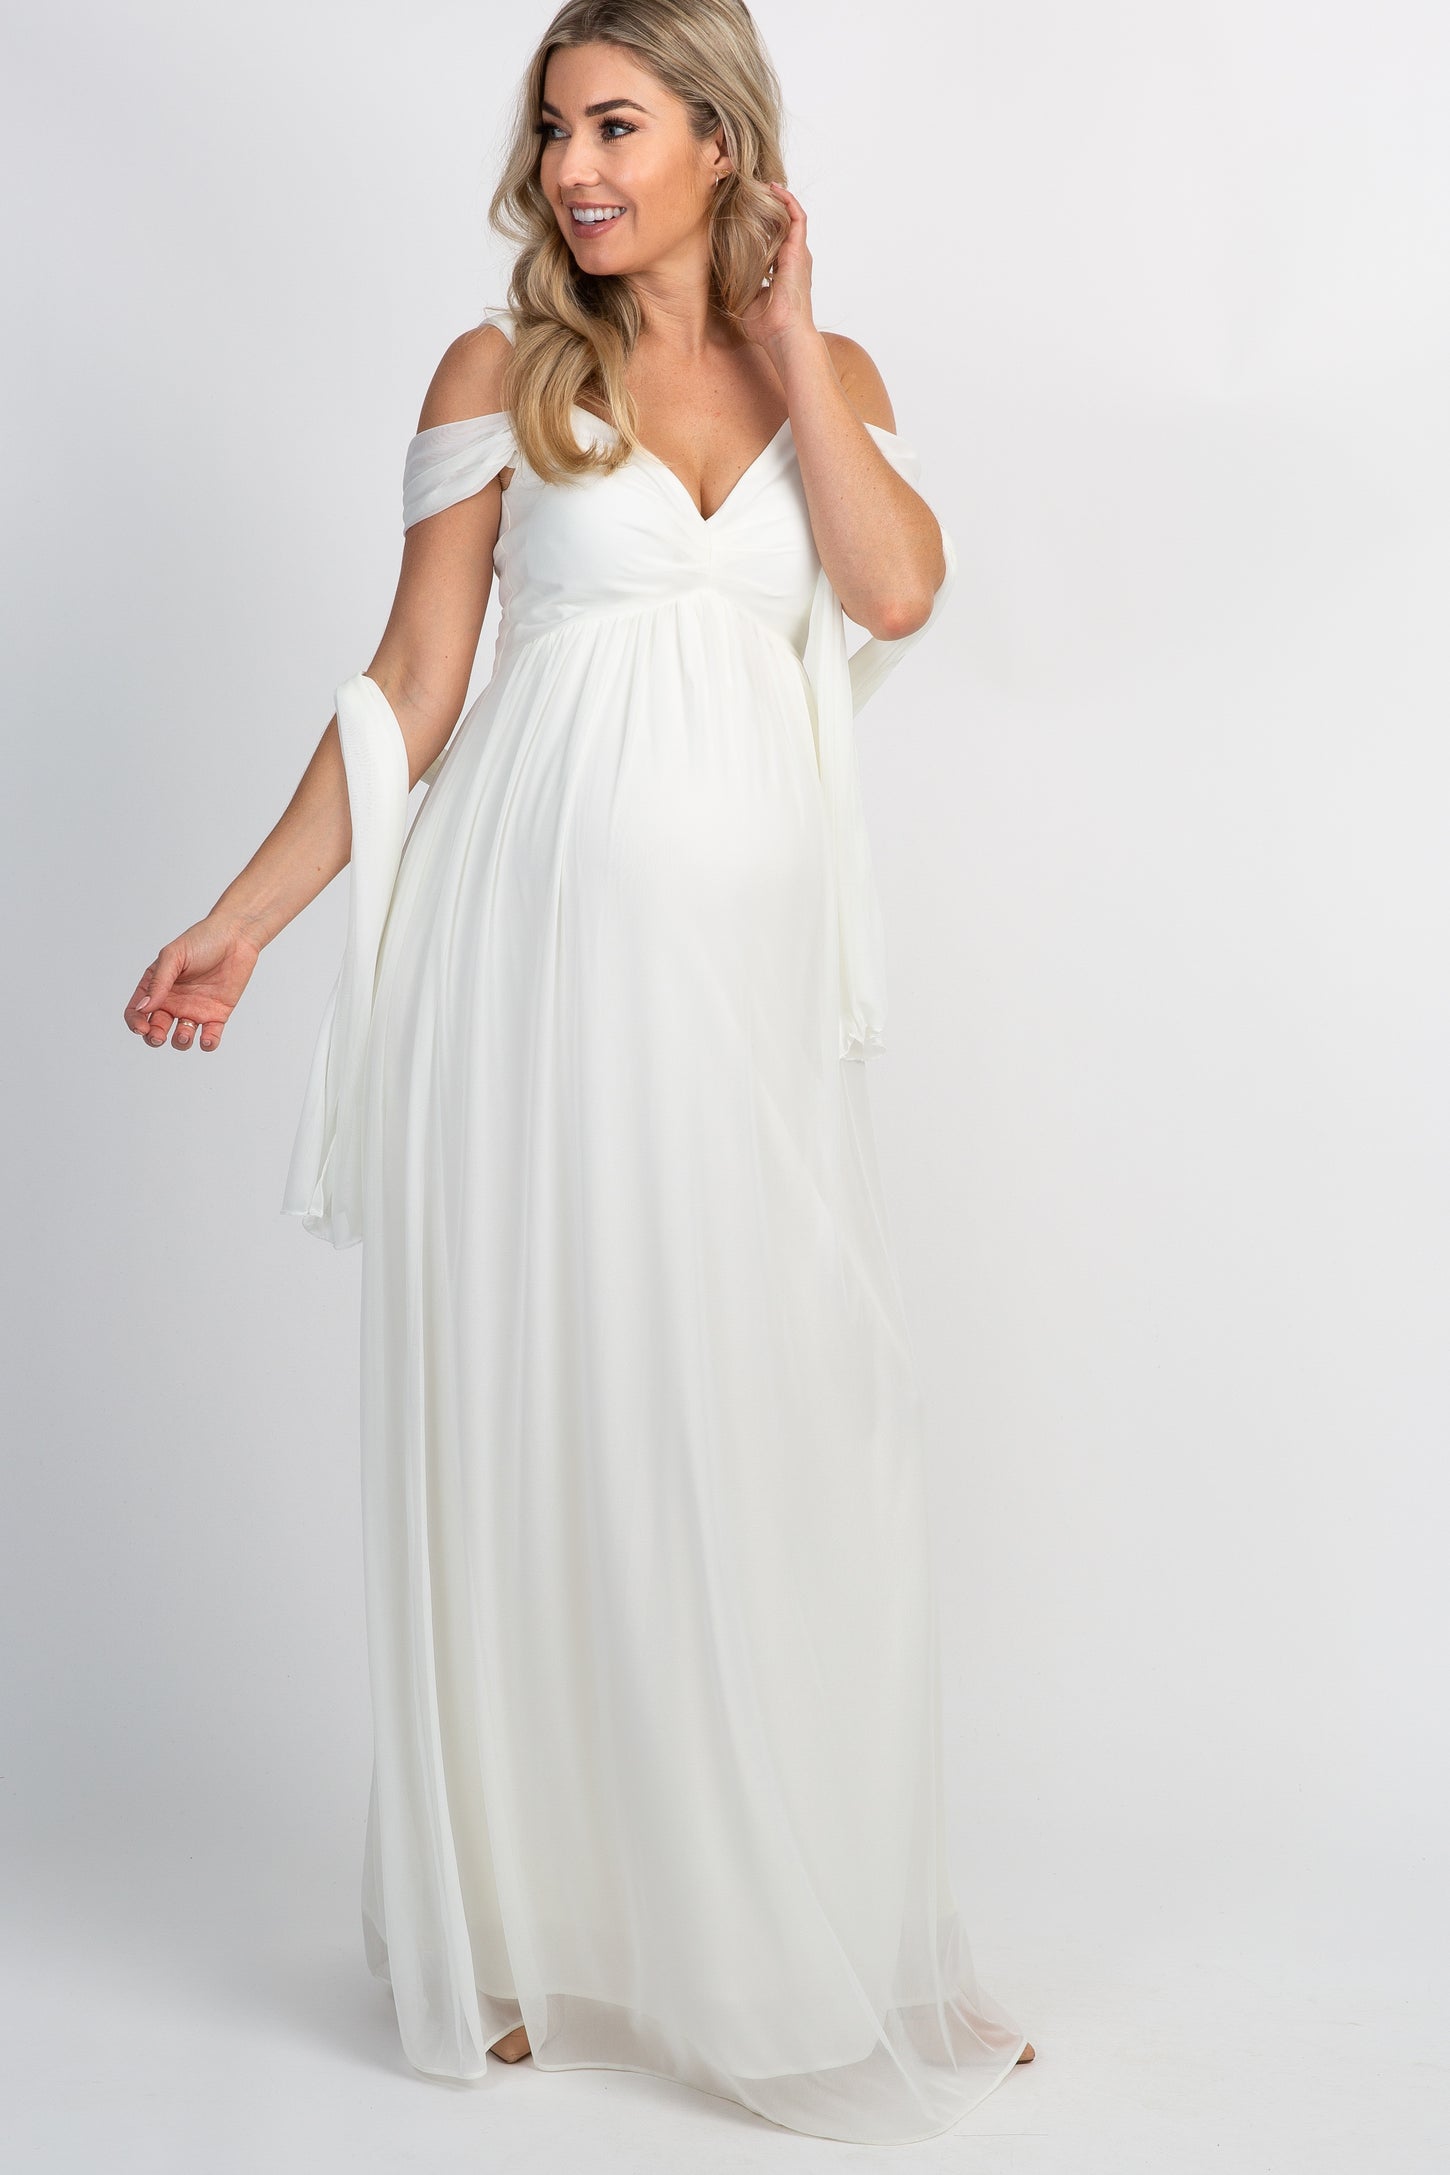 White Chiffon Cold Shoulder Maternity Evening Gown– PinkBlush